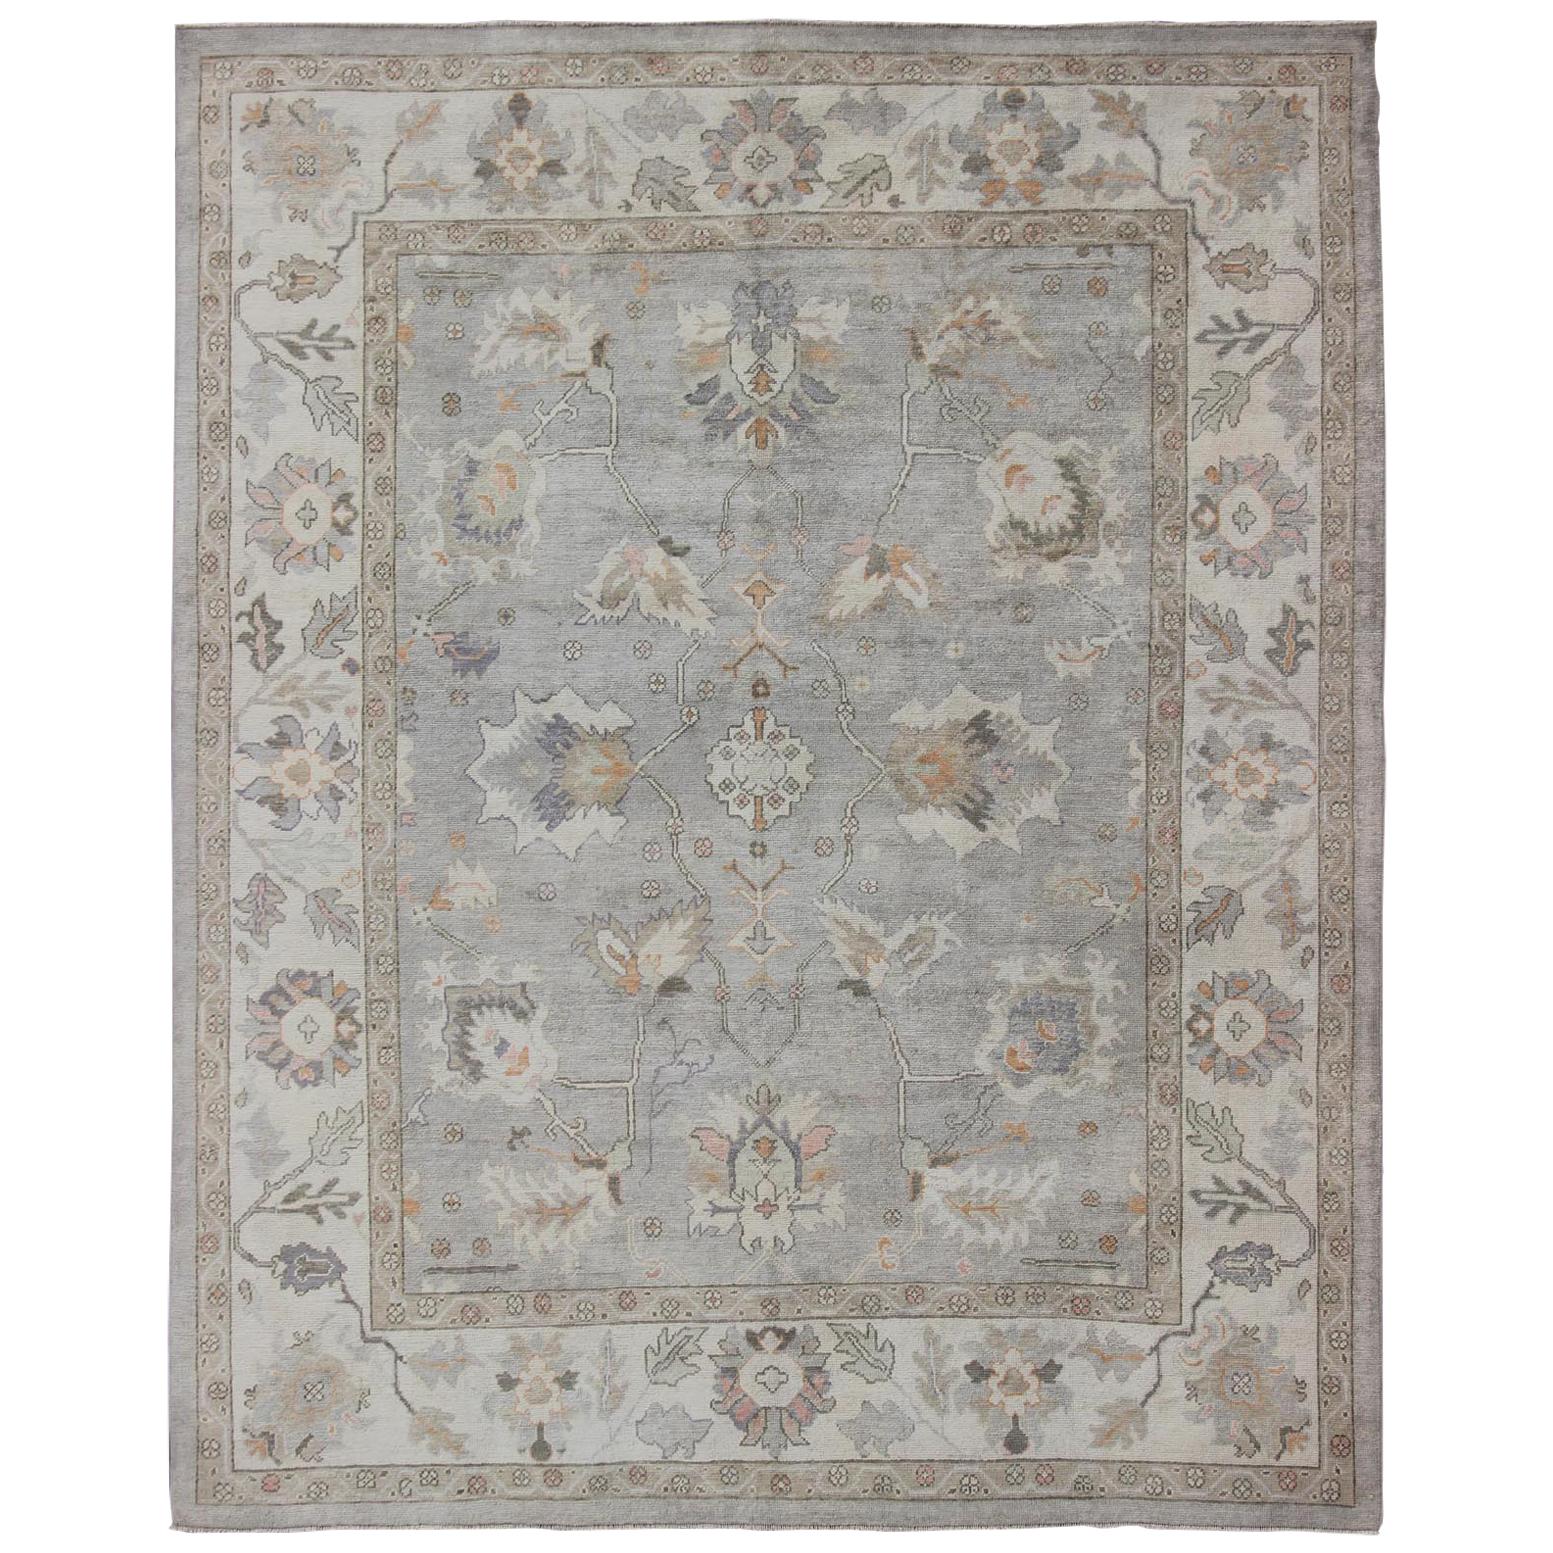 Square Shaped Turkish Oushak Rug with Neutral Color Palette